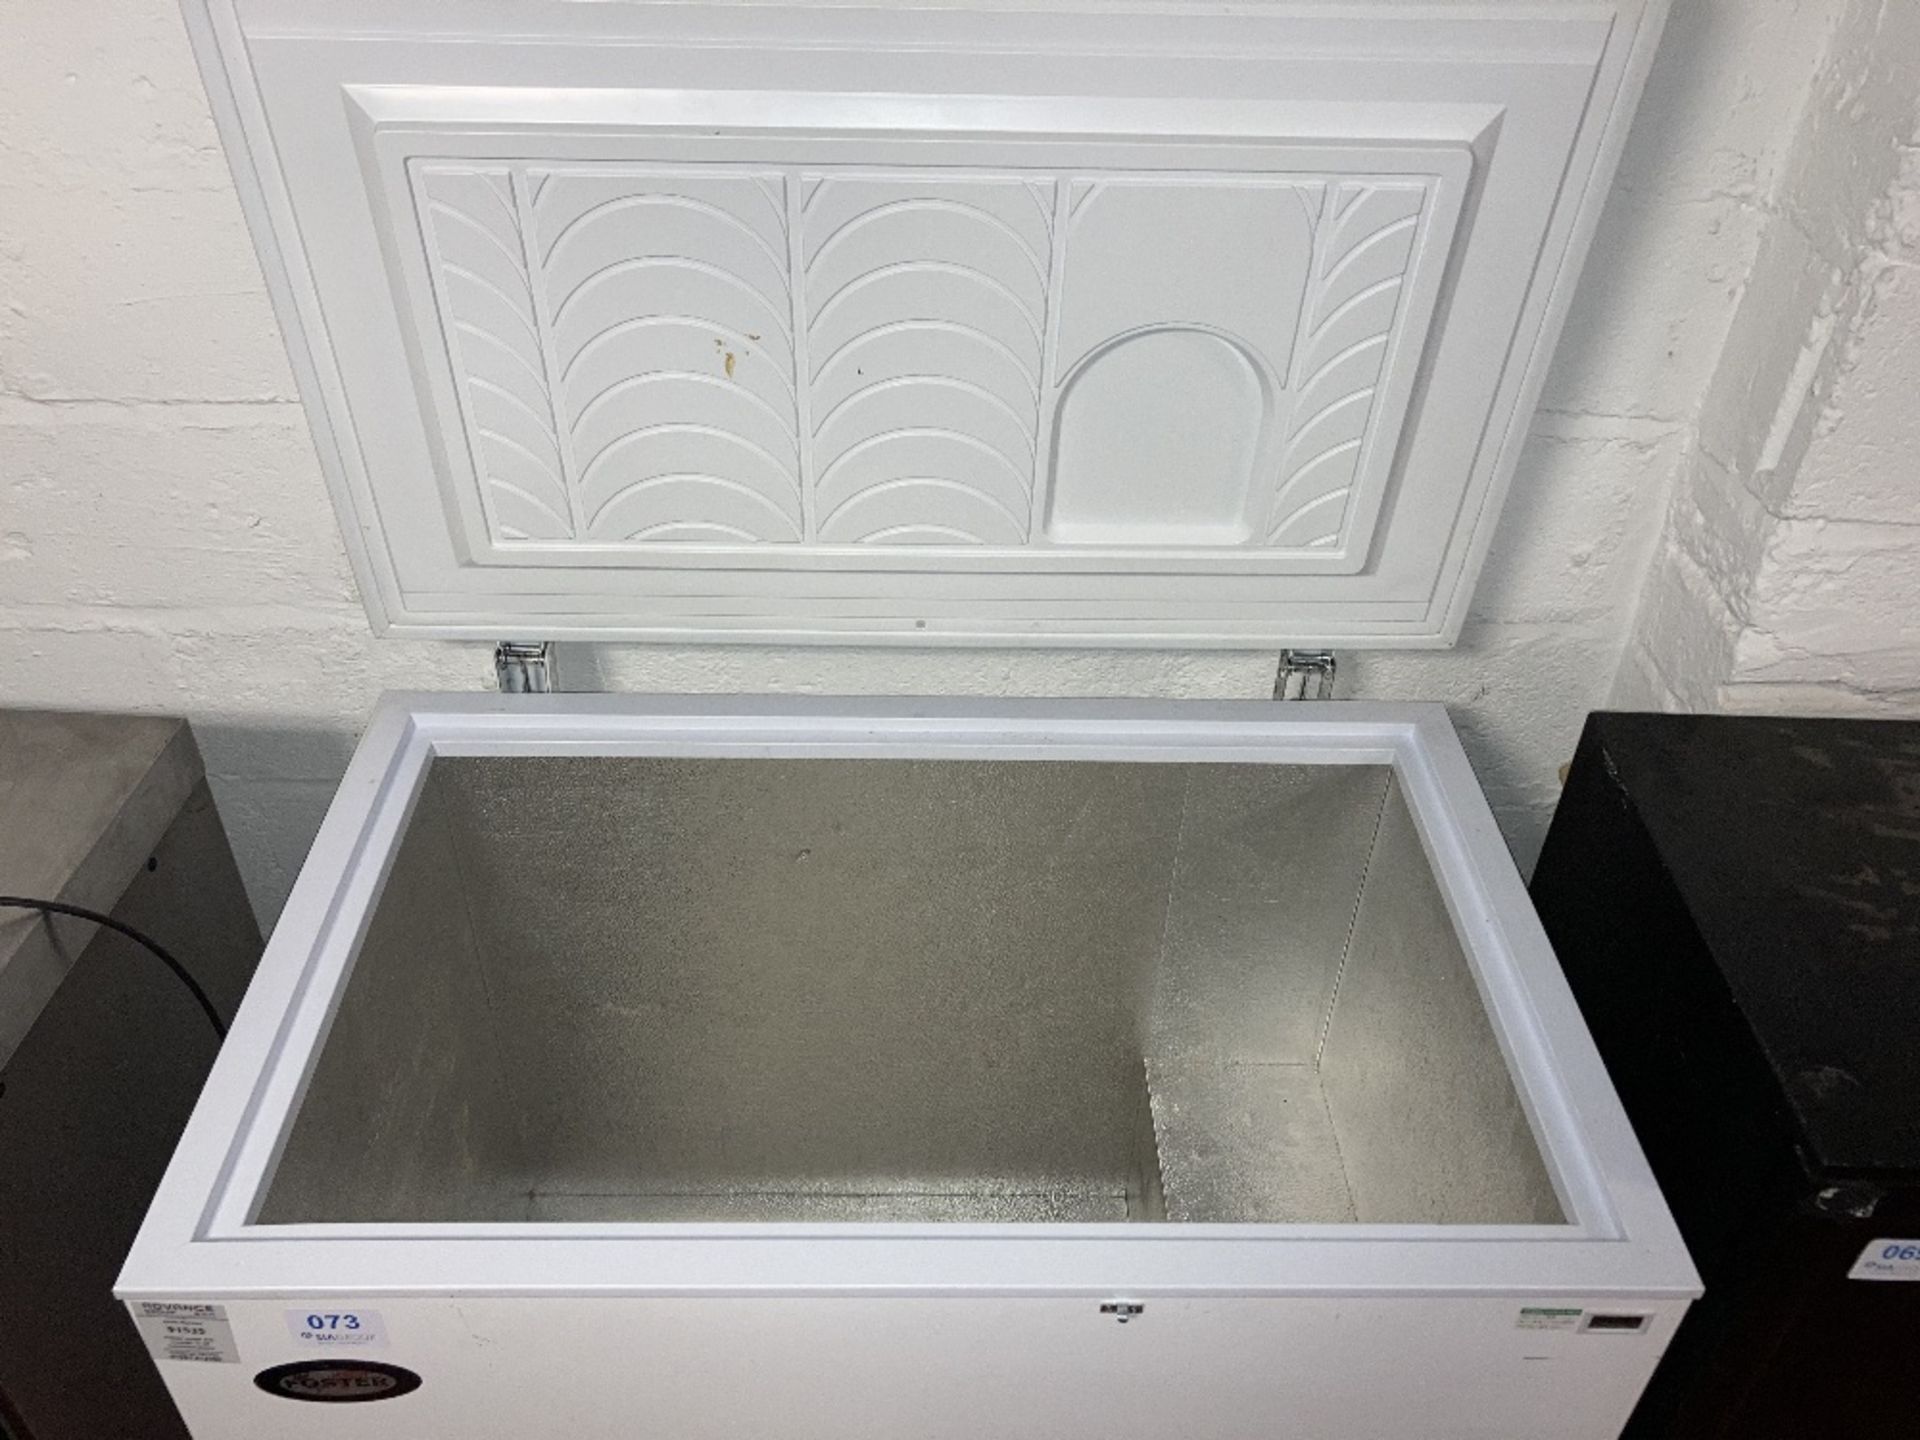 Foster FCF305 Chest Freezer - Image 3 of 5